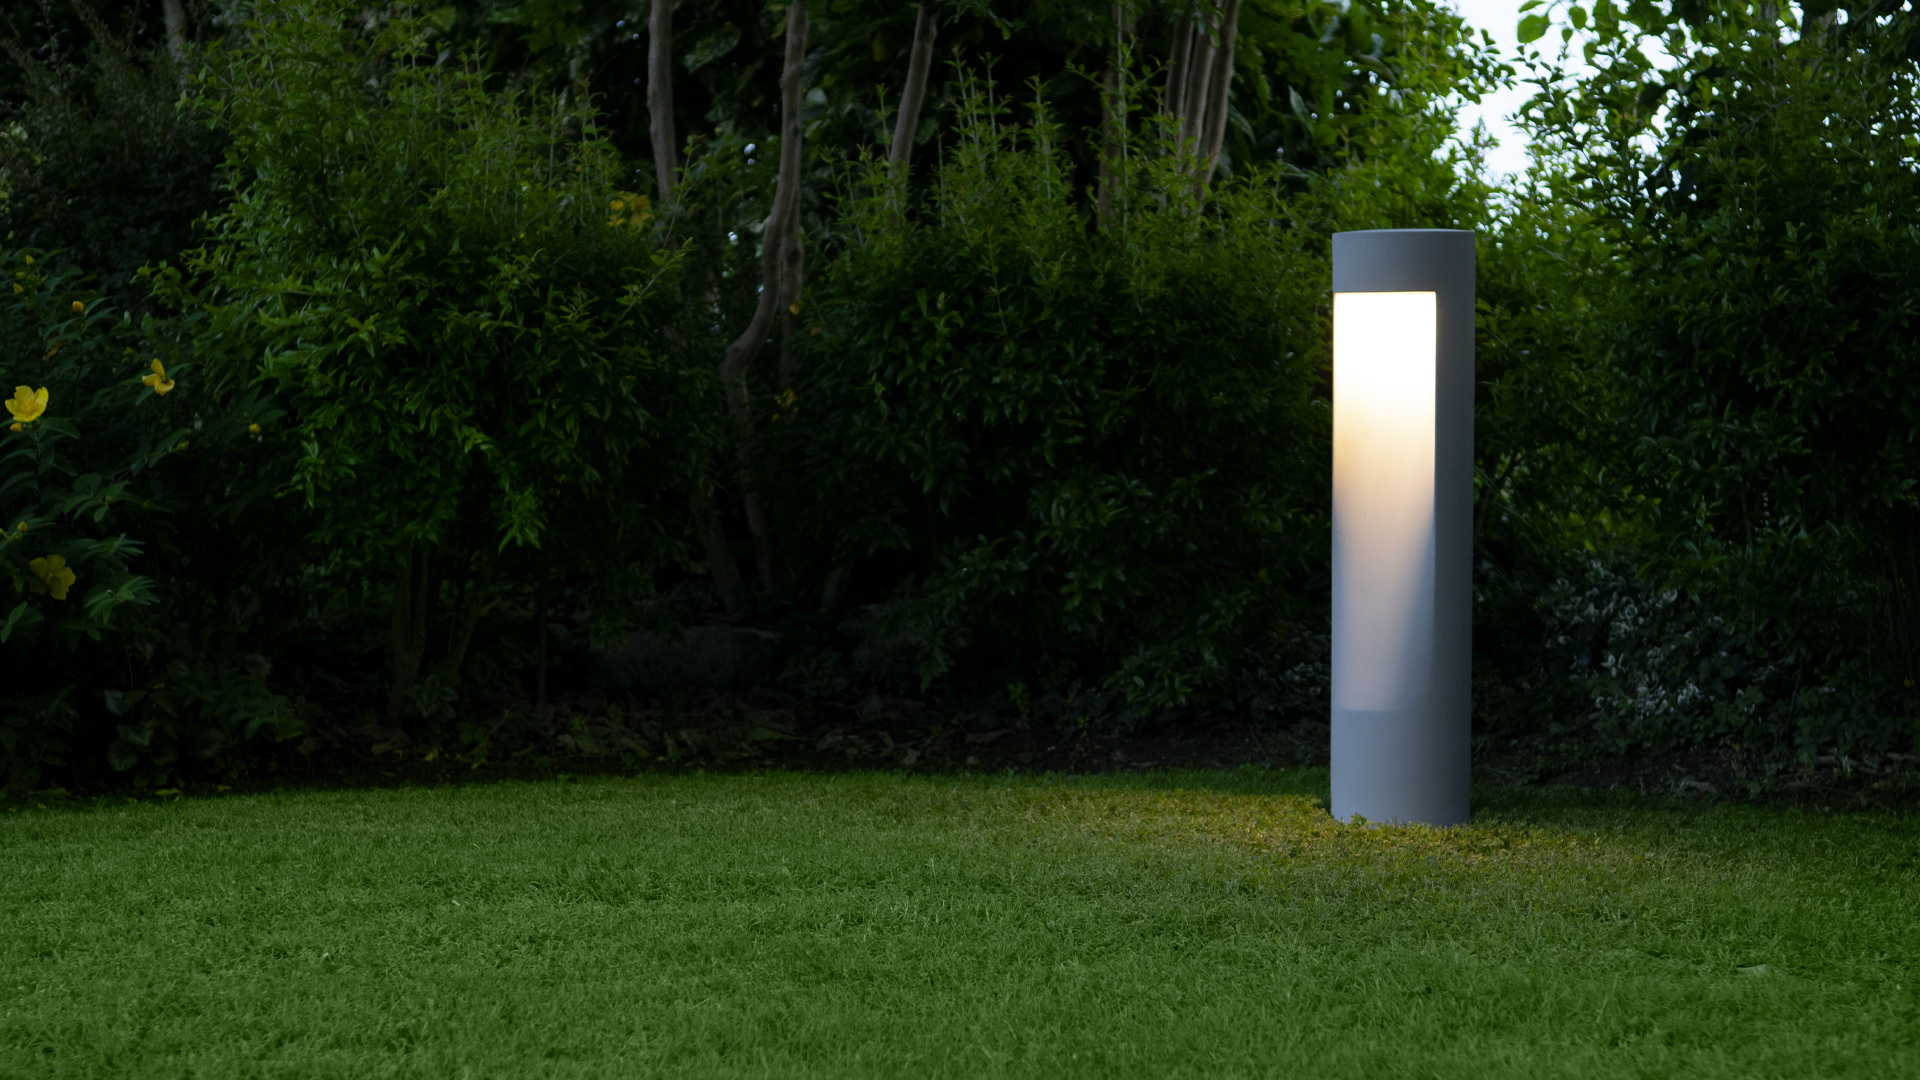 The LEVICO lamp wins the honourable mention